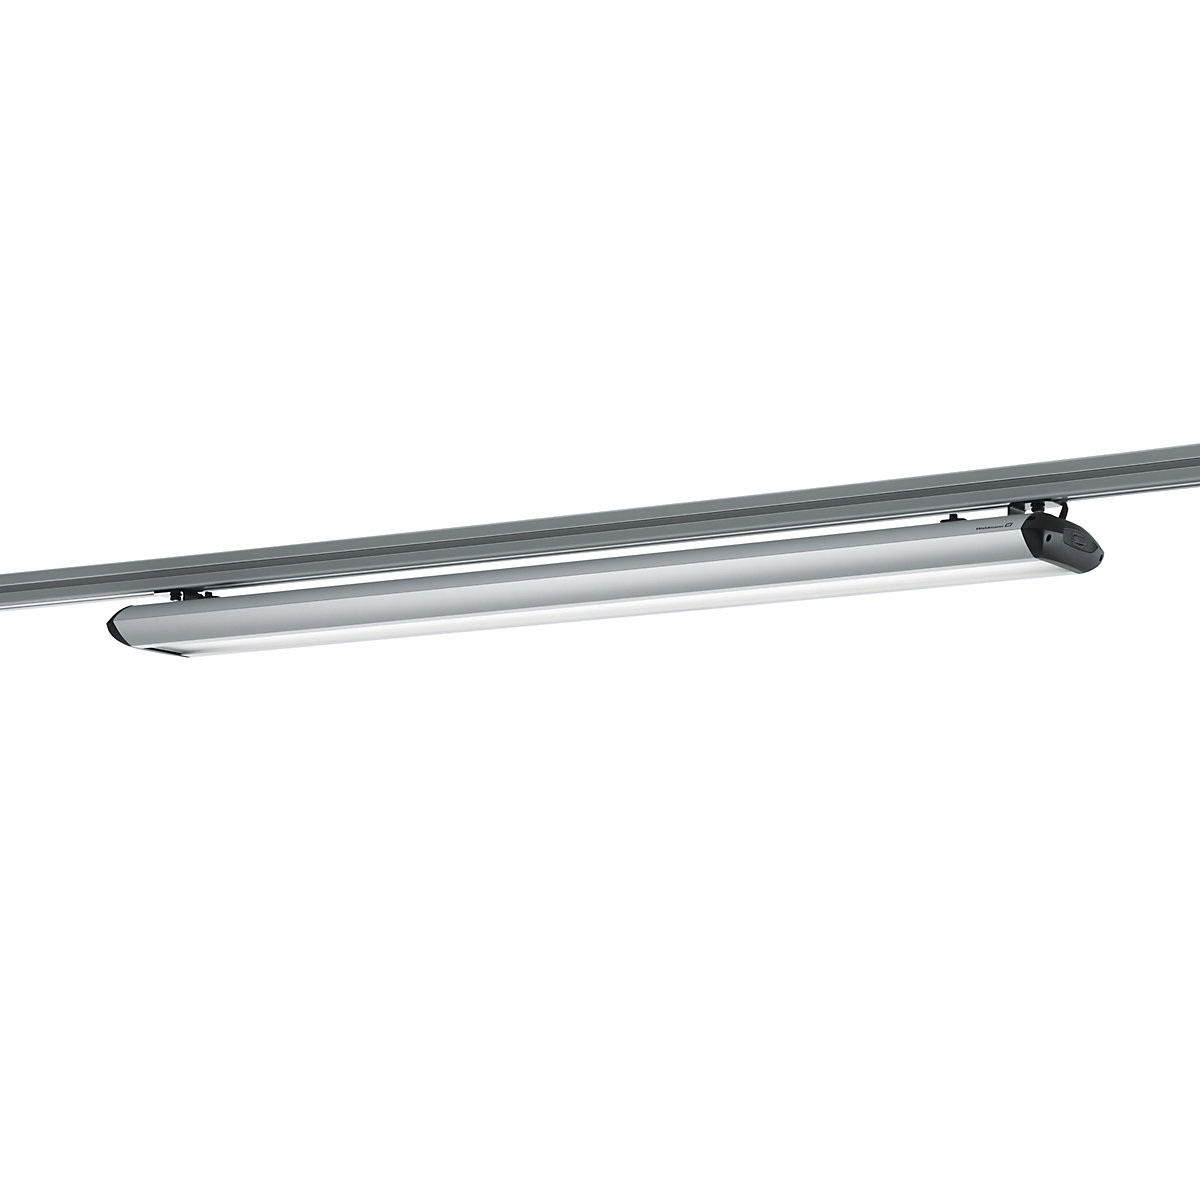 TAMETO LED system light – Waldmann, fixed mounting at the top, 38 W, width 1256 mm-6